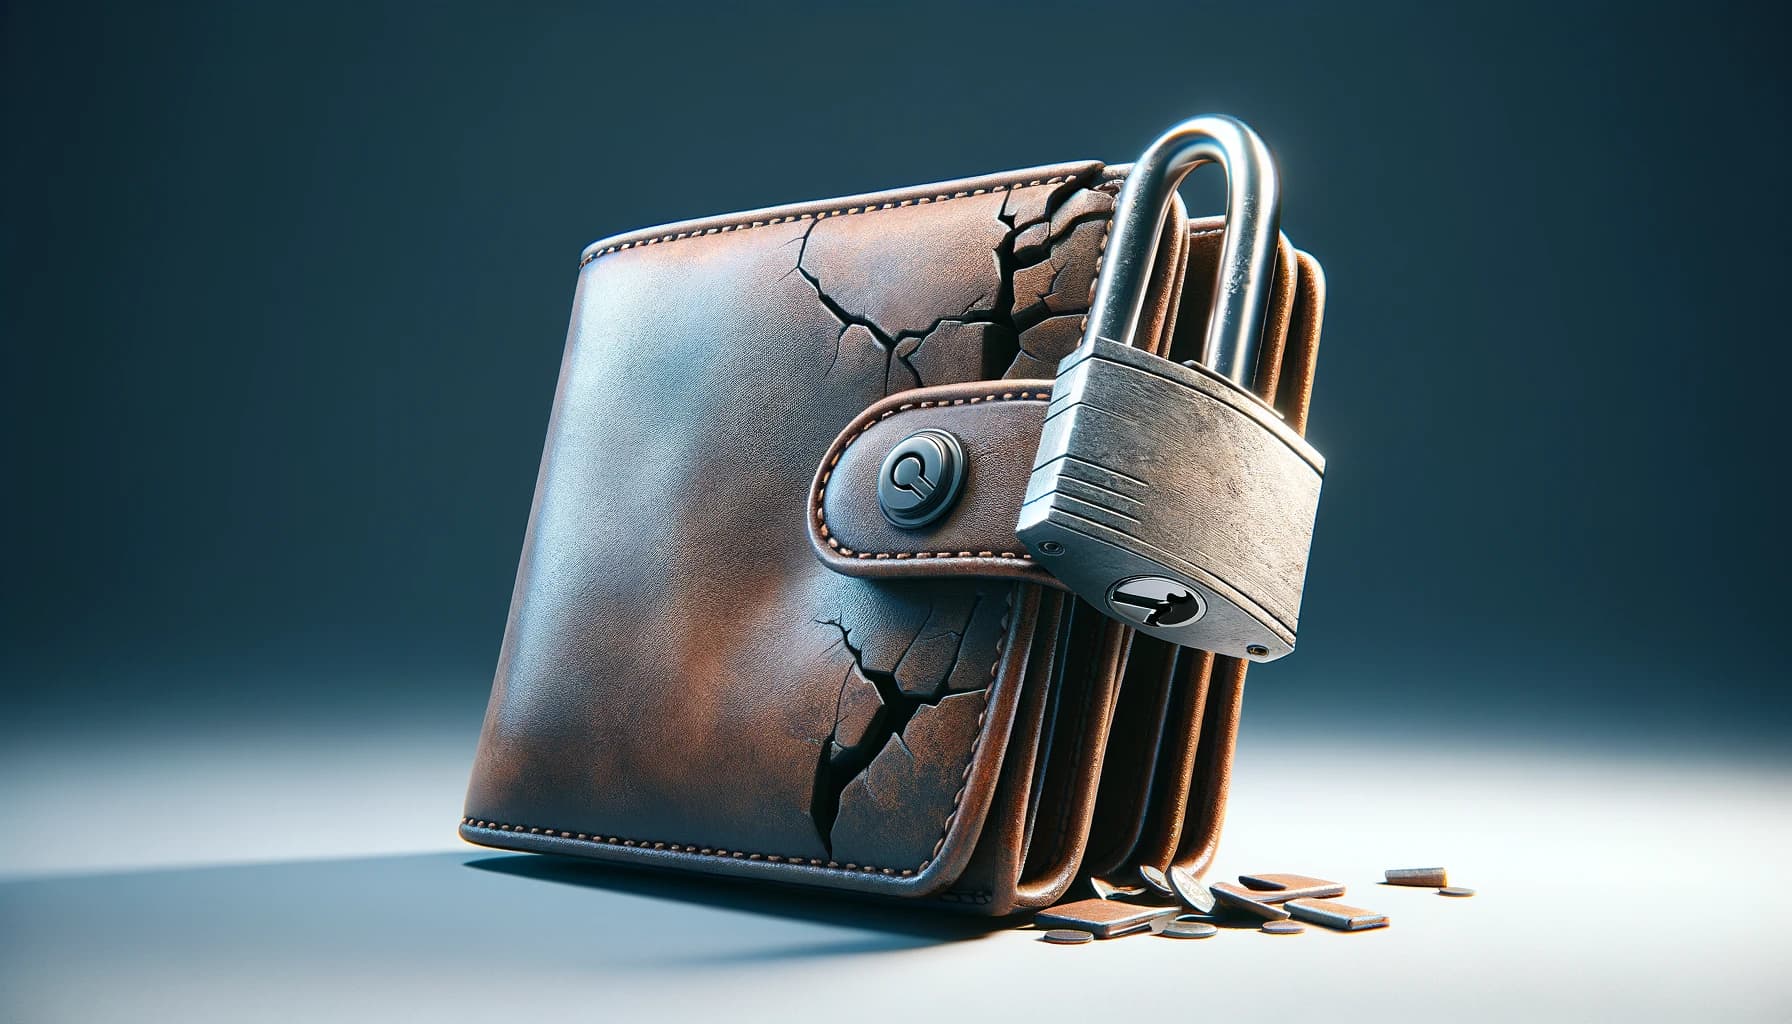 Bucket Technologies image showing distressed wallet with a padlock on the side of it as if its locked.